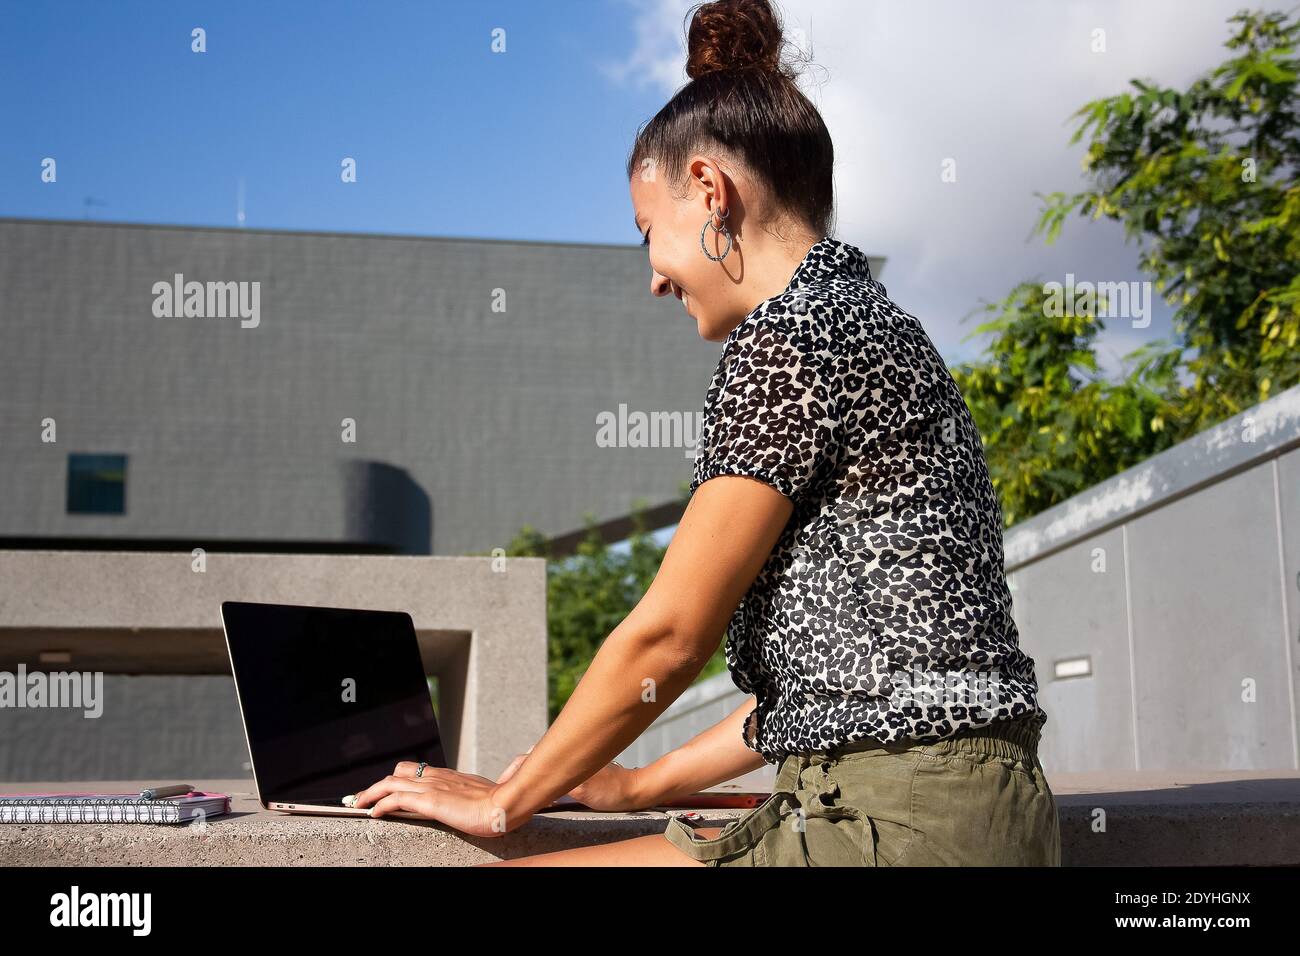 Young woman remote working with her laptop on a outside location Stock Photo